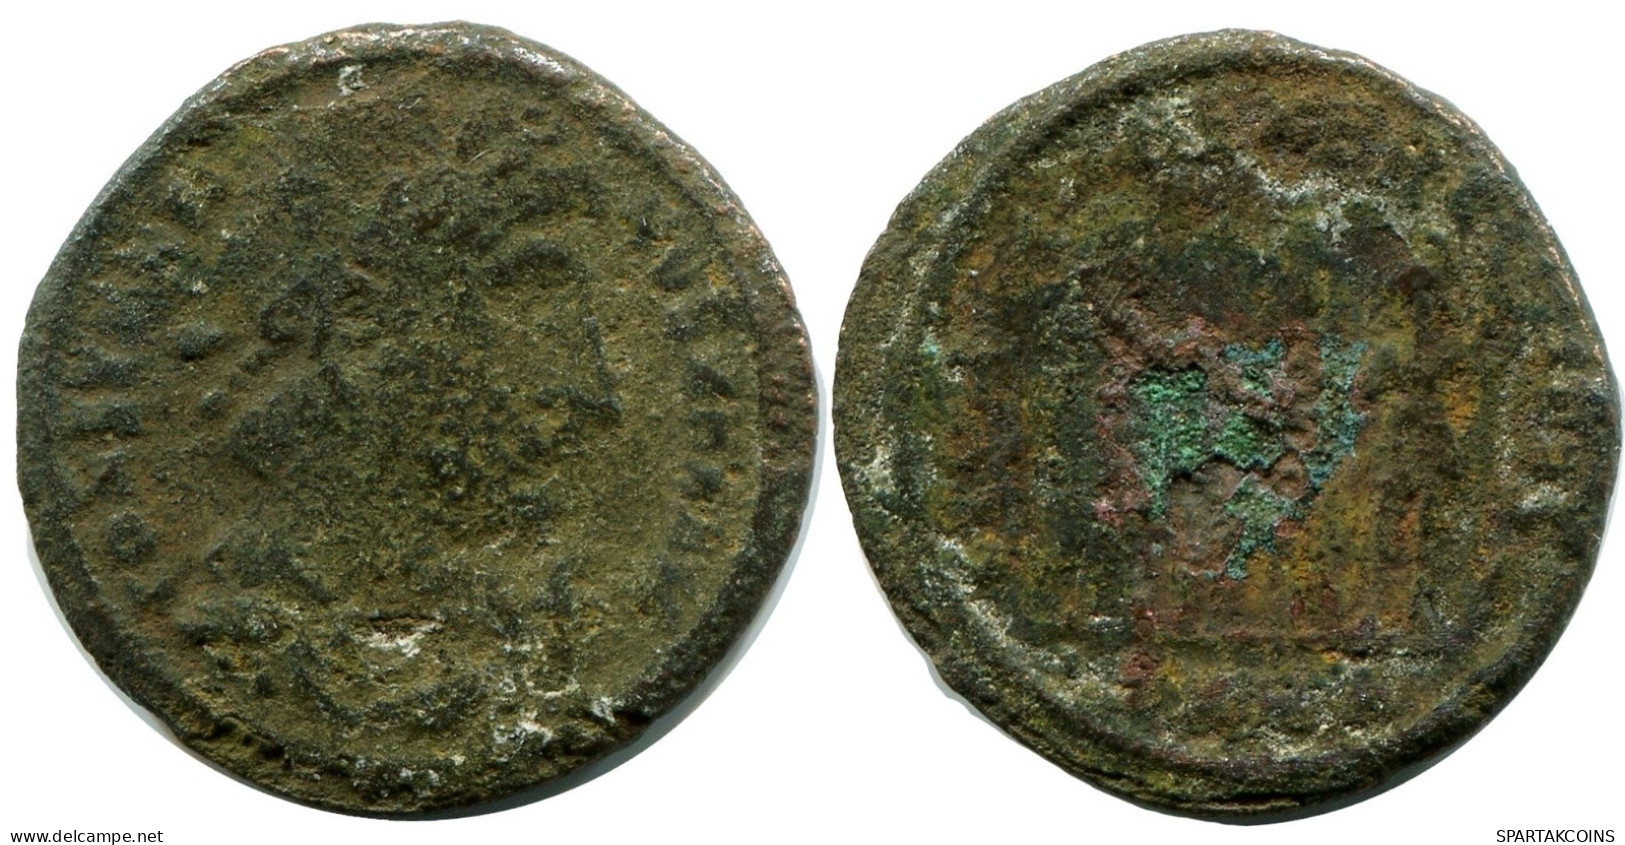 CONSTANTINE I MINTED IN HERACLEA FROM THE ROYAL ONTARIO MUSEUM #ANC11197.14.U.A - L'Empire Chrétien (307 à 363)